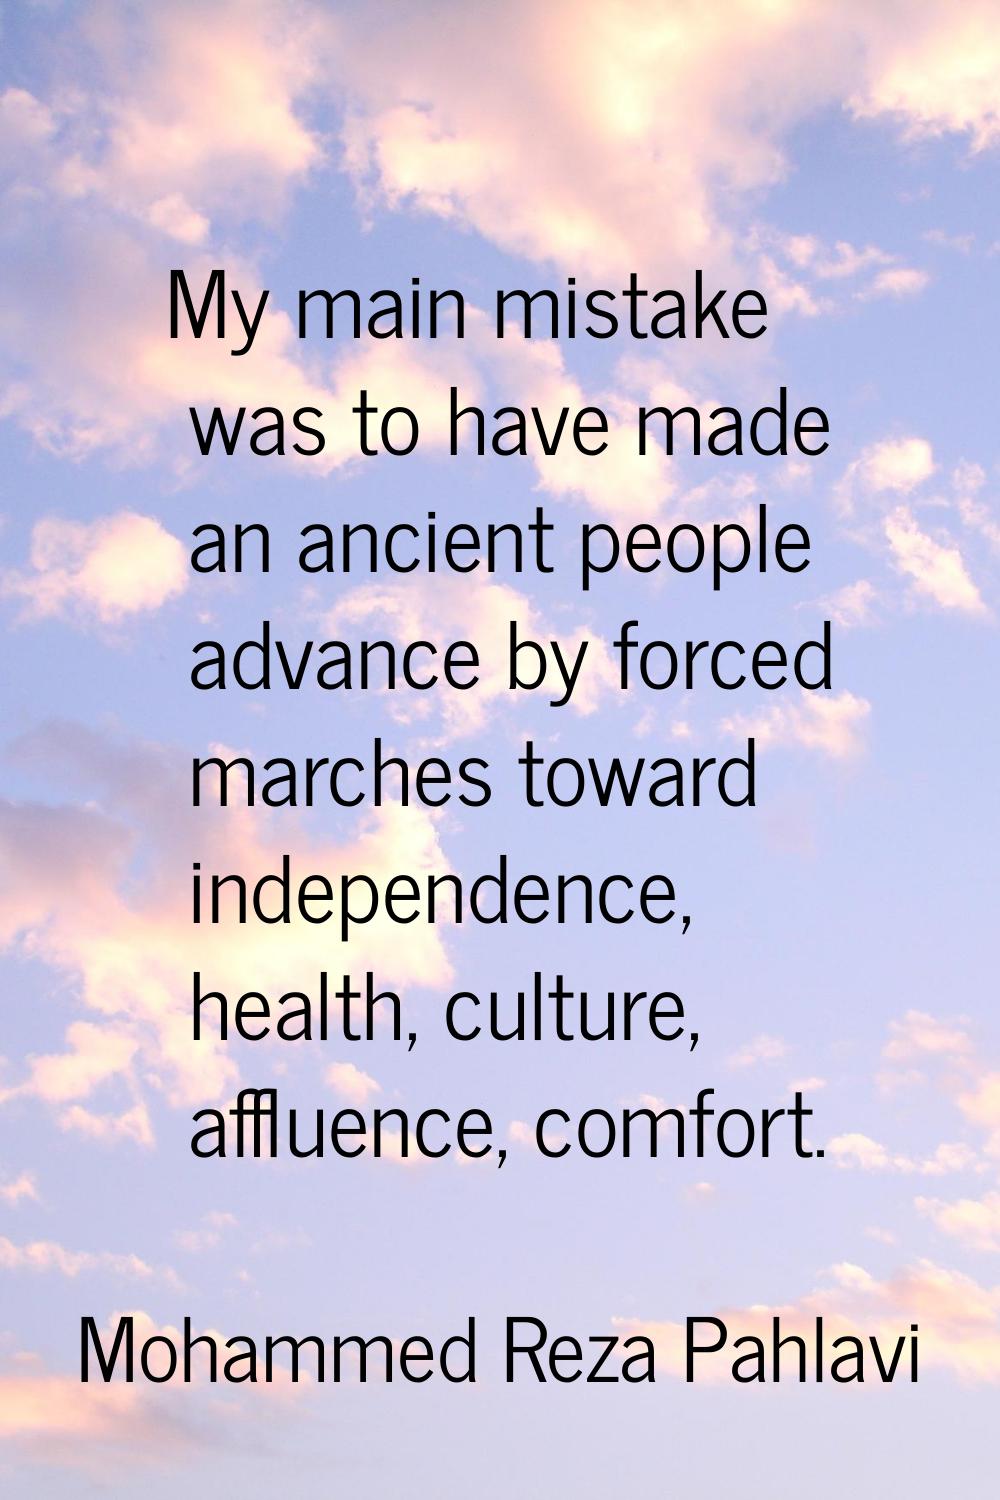 My main mistake was to have made an ancient people advance by forced marches toward independence, h